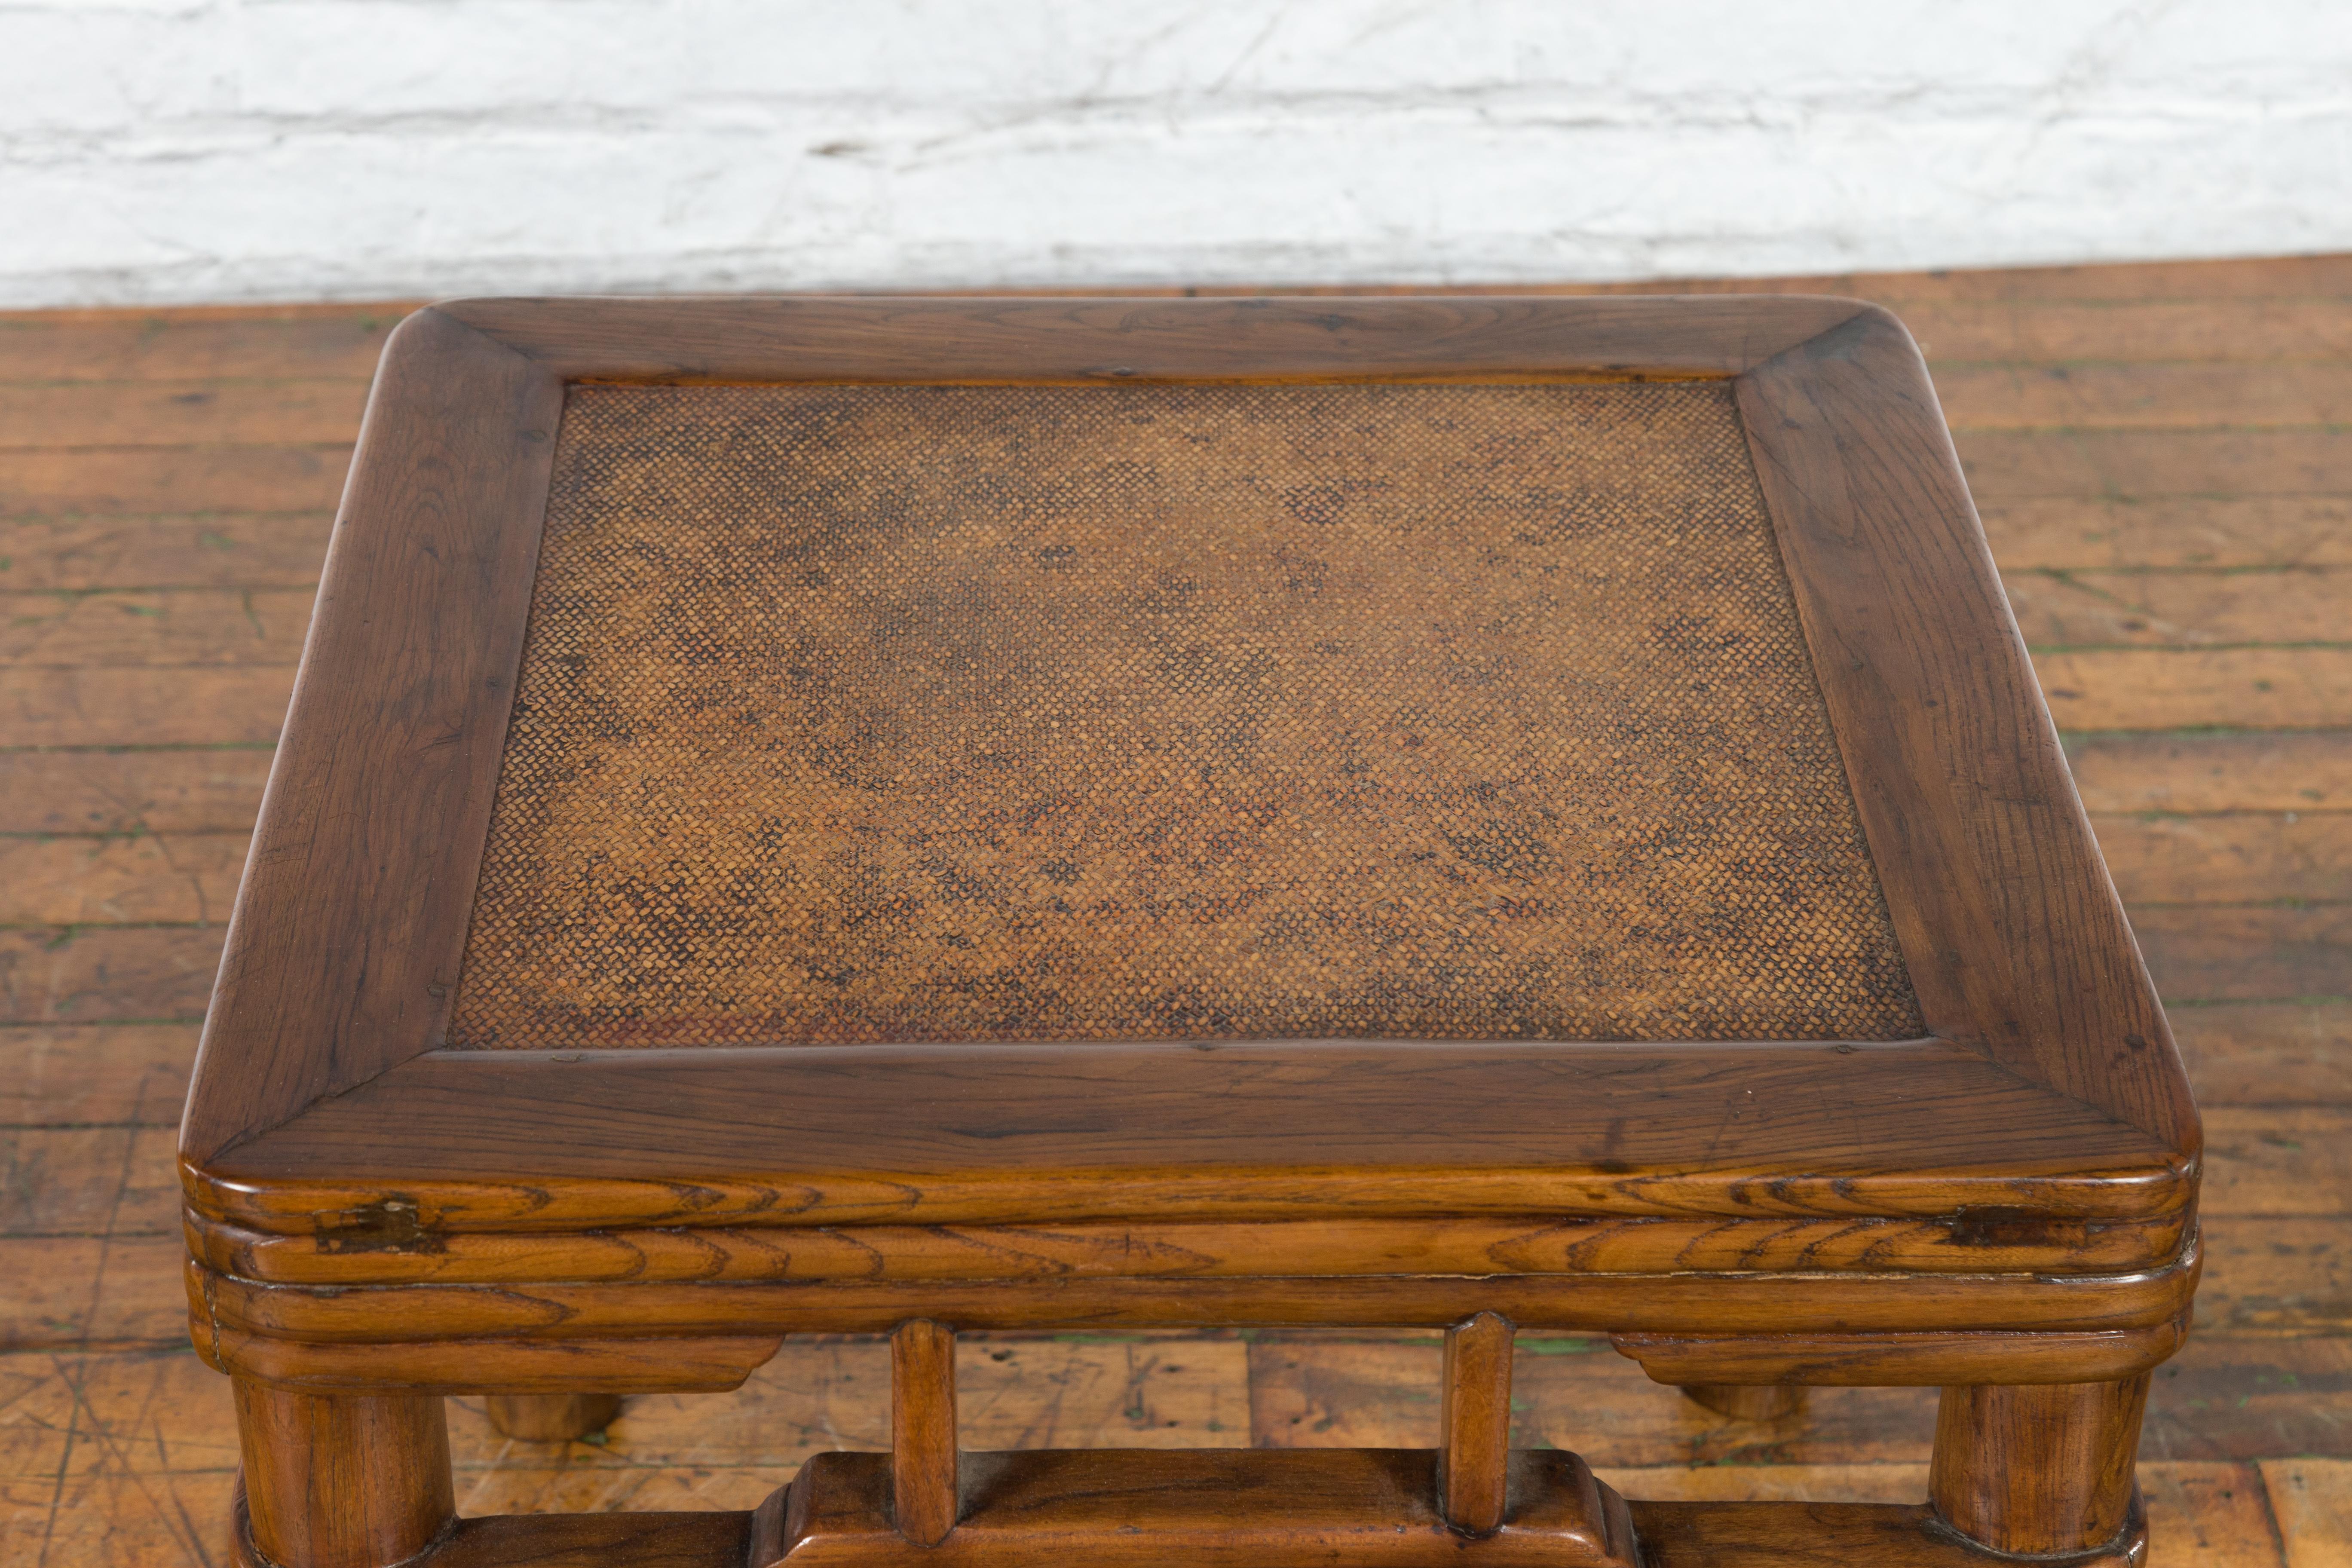 Chinese Qing Dynasty Early 20th Century Elmwood Side Table with Woven Rattan Top For Sale 9